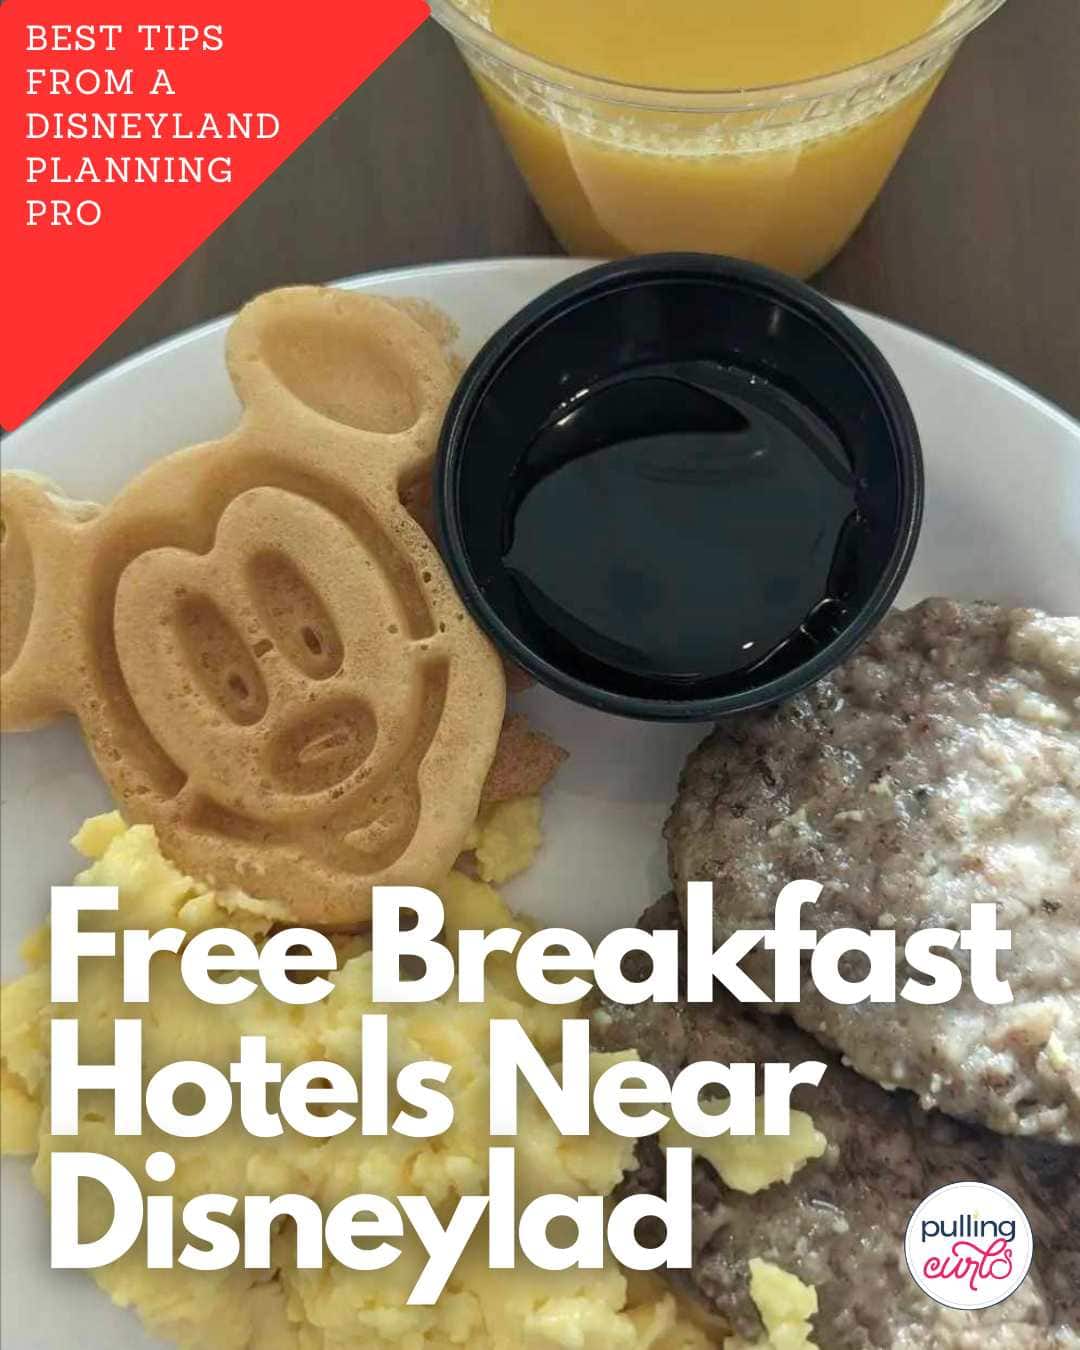 Start your Disneyland adventure right with a complimentary breakfast! Explore hotels near Disneyland offering free breakfast options to fuel your family's fun-filled day. From continental classics to hearty spreads, enjoy convenience and savings as you make memories in the happiest place on earth! #DisneylandHotels Disneyland hotels Free breakfast Family travel Disney magic Disneyland vacation Complimentary breakfast Disneyland accommodations Breakfast included Hotel deals Theme park stays via @pullingcurls